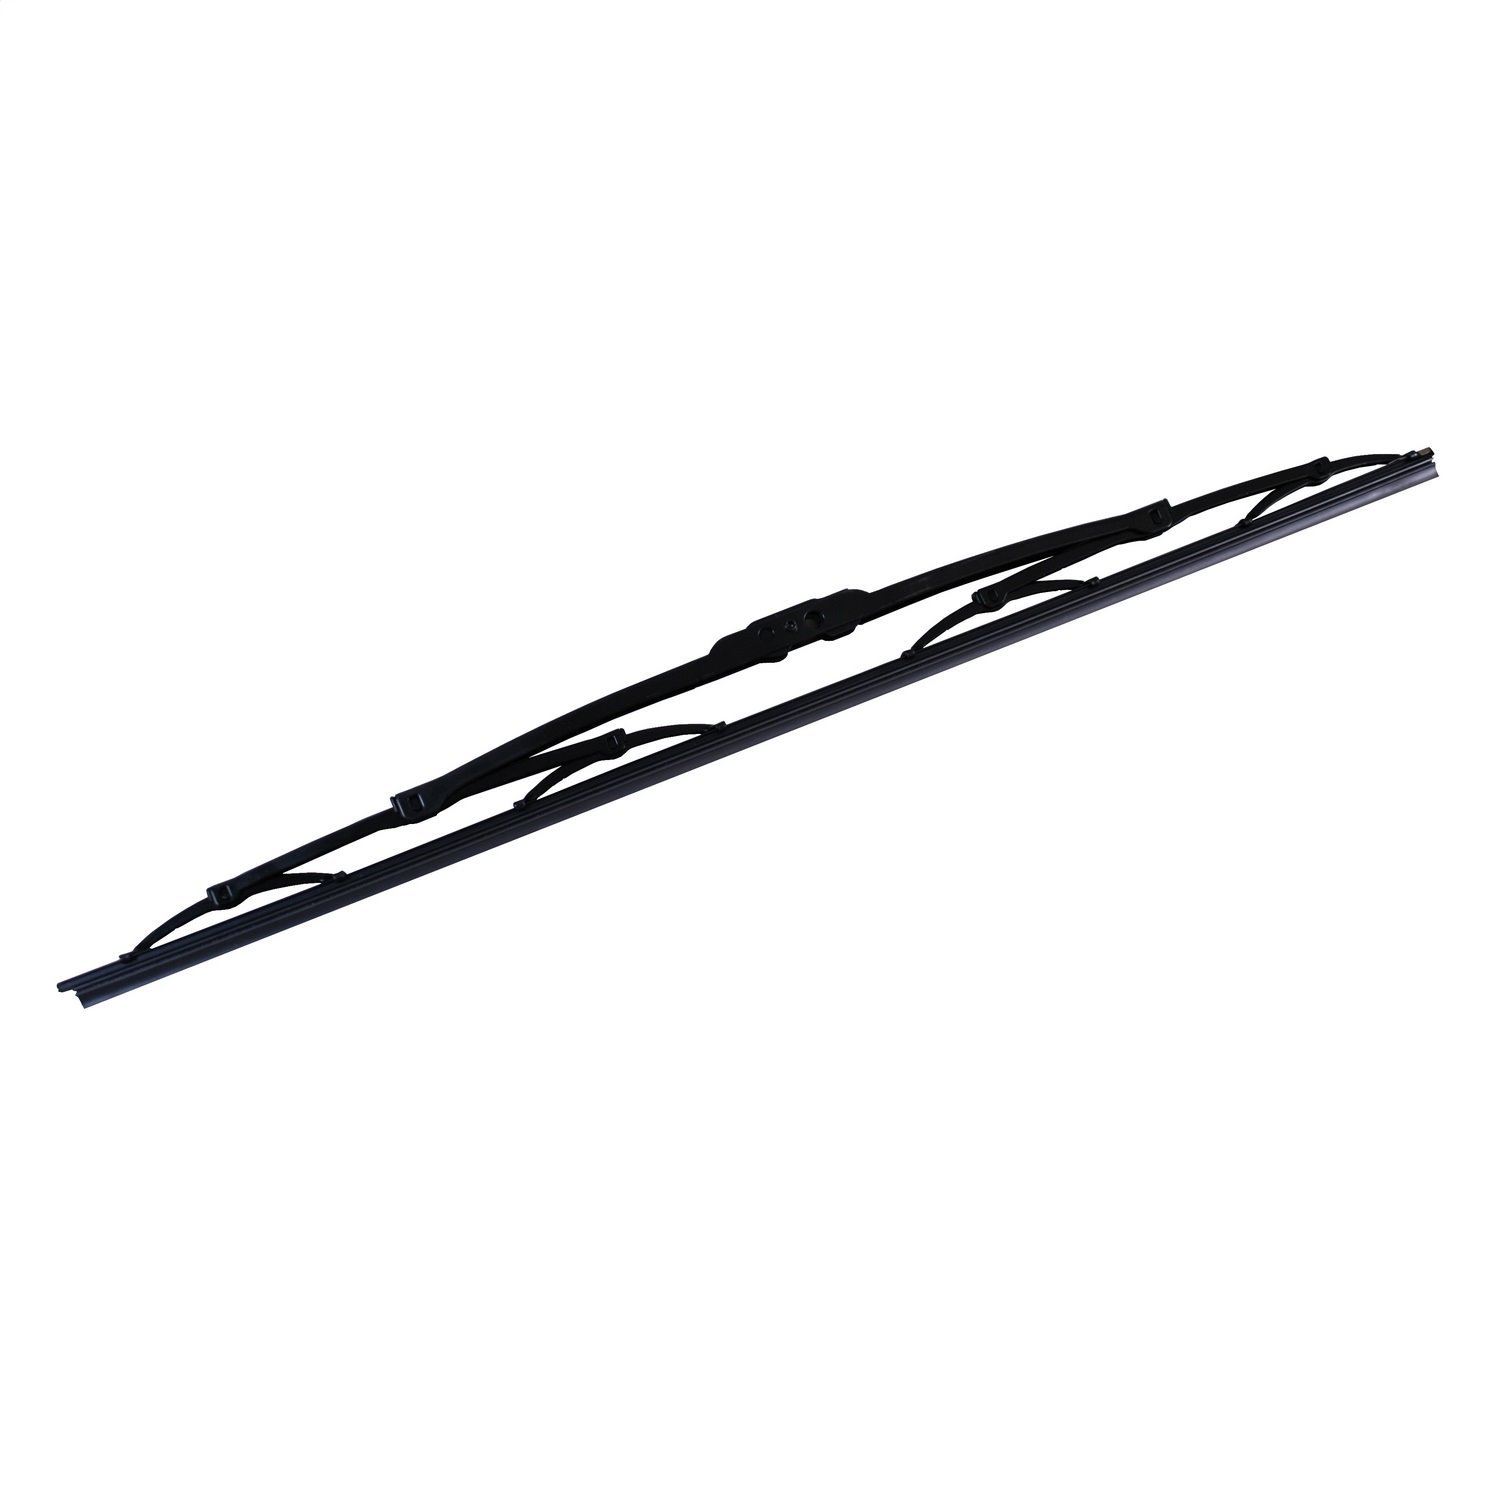 This 21 inch front wiper blade from Omix-ADA fits 99-11 Jeep Grand Cherokees.